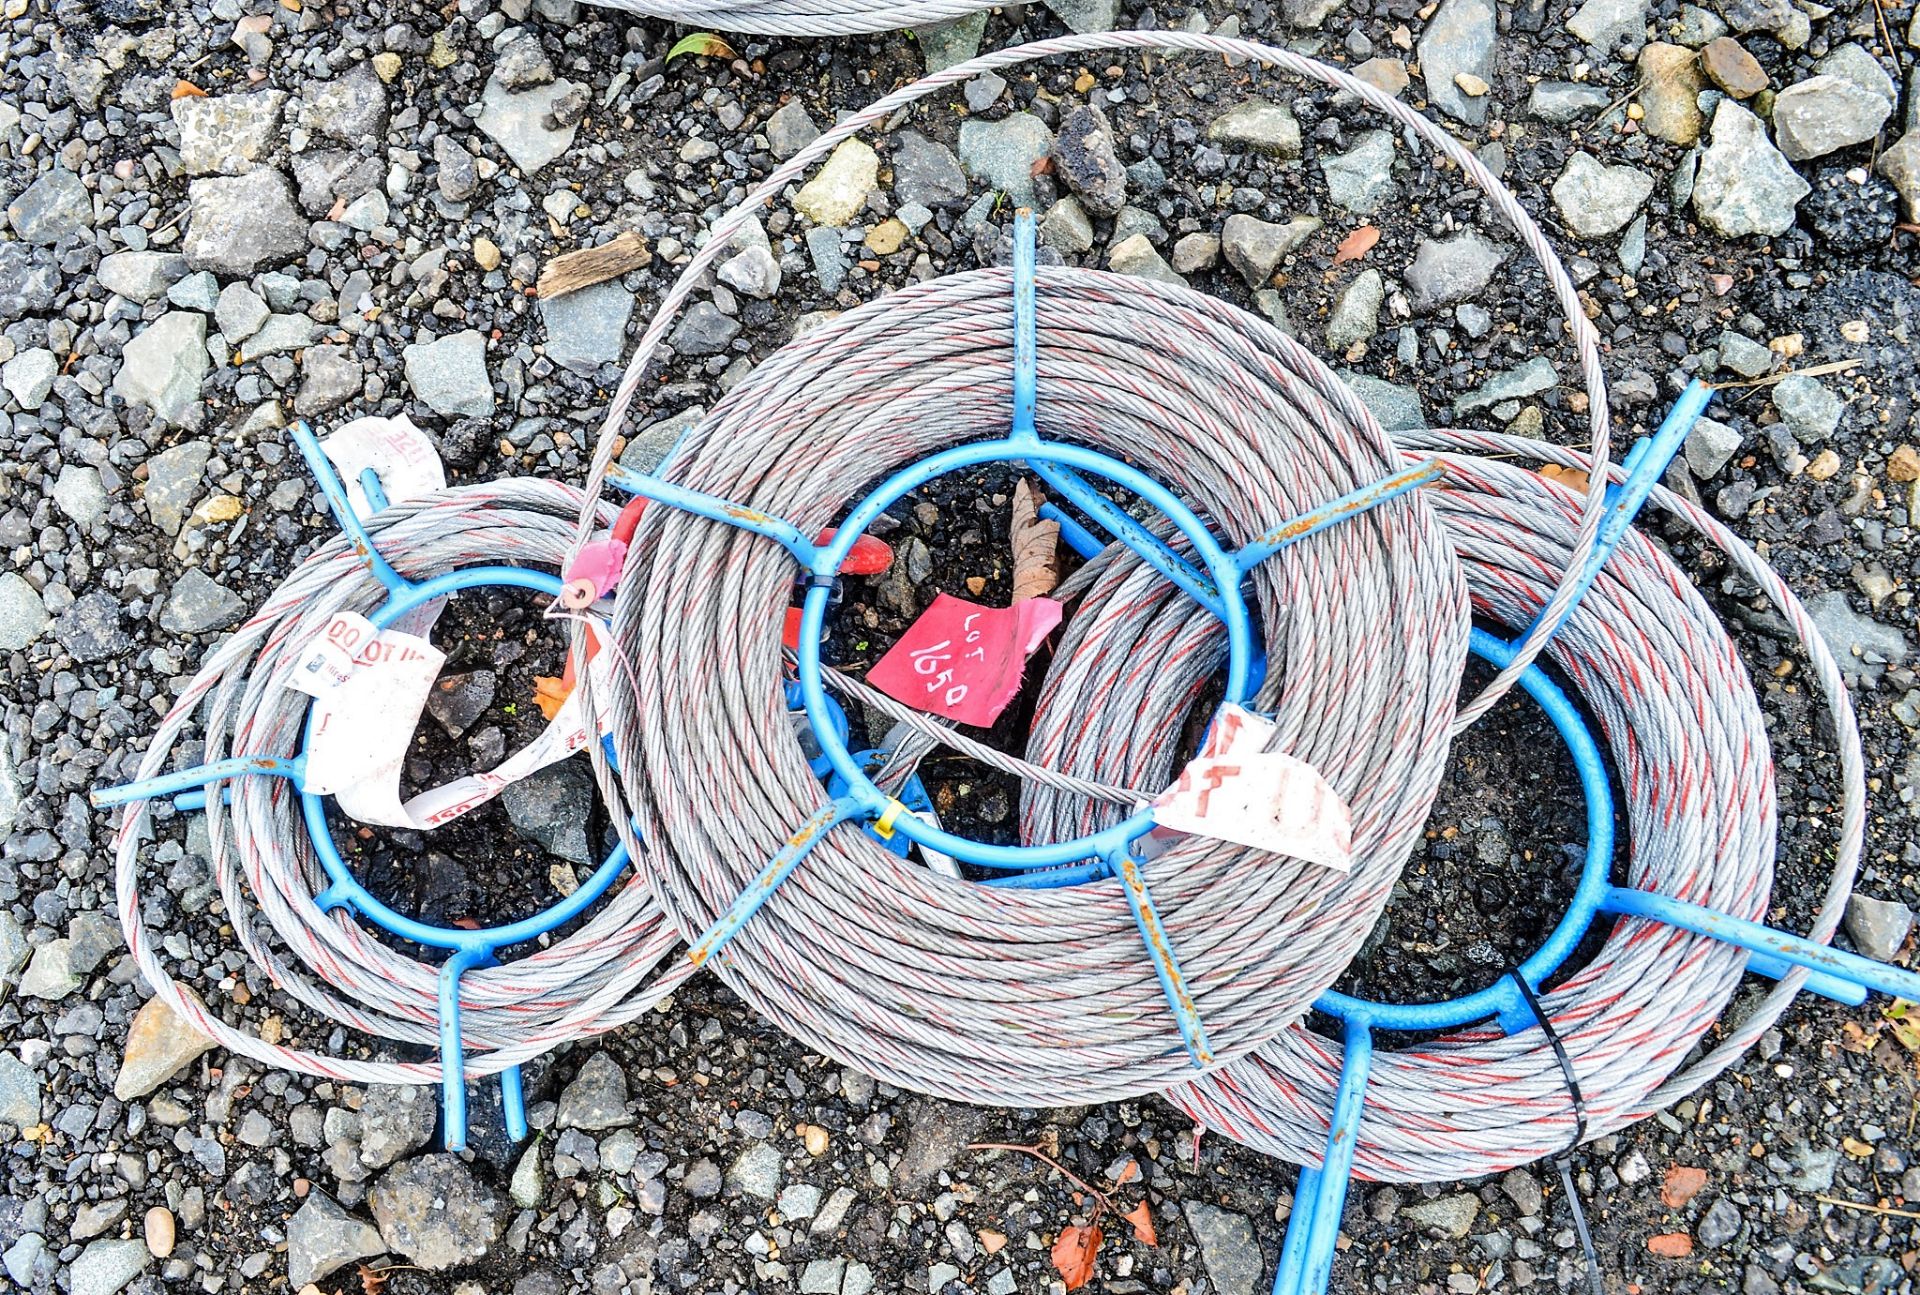 3 - steel cables